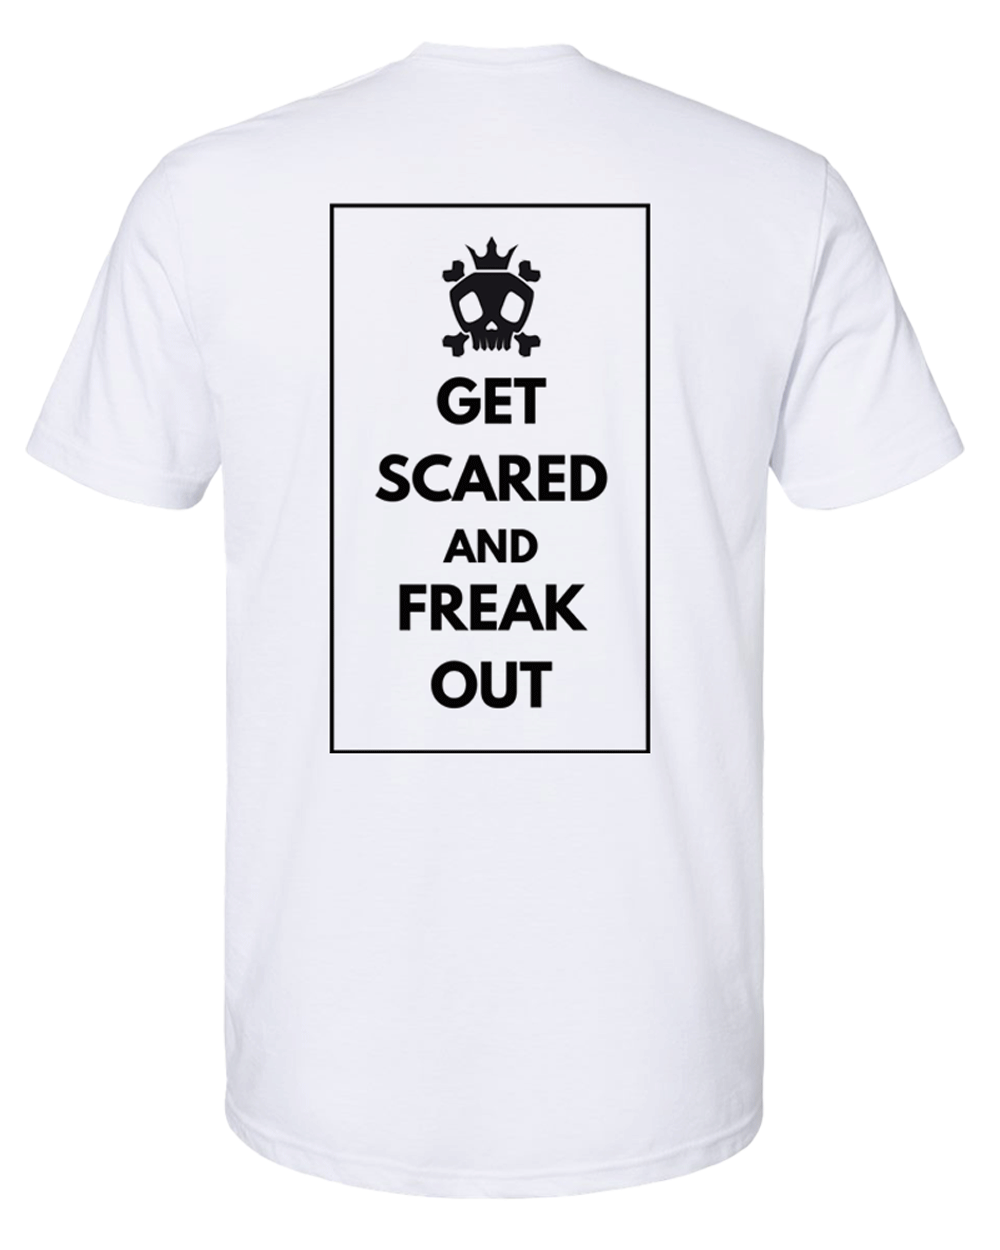 Hearse Ghost Tour “Scared” Unisex T-Shirt